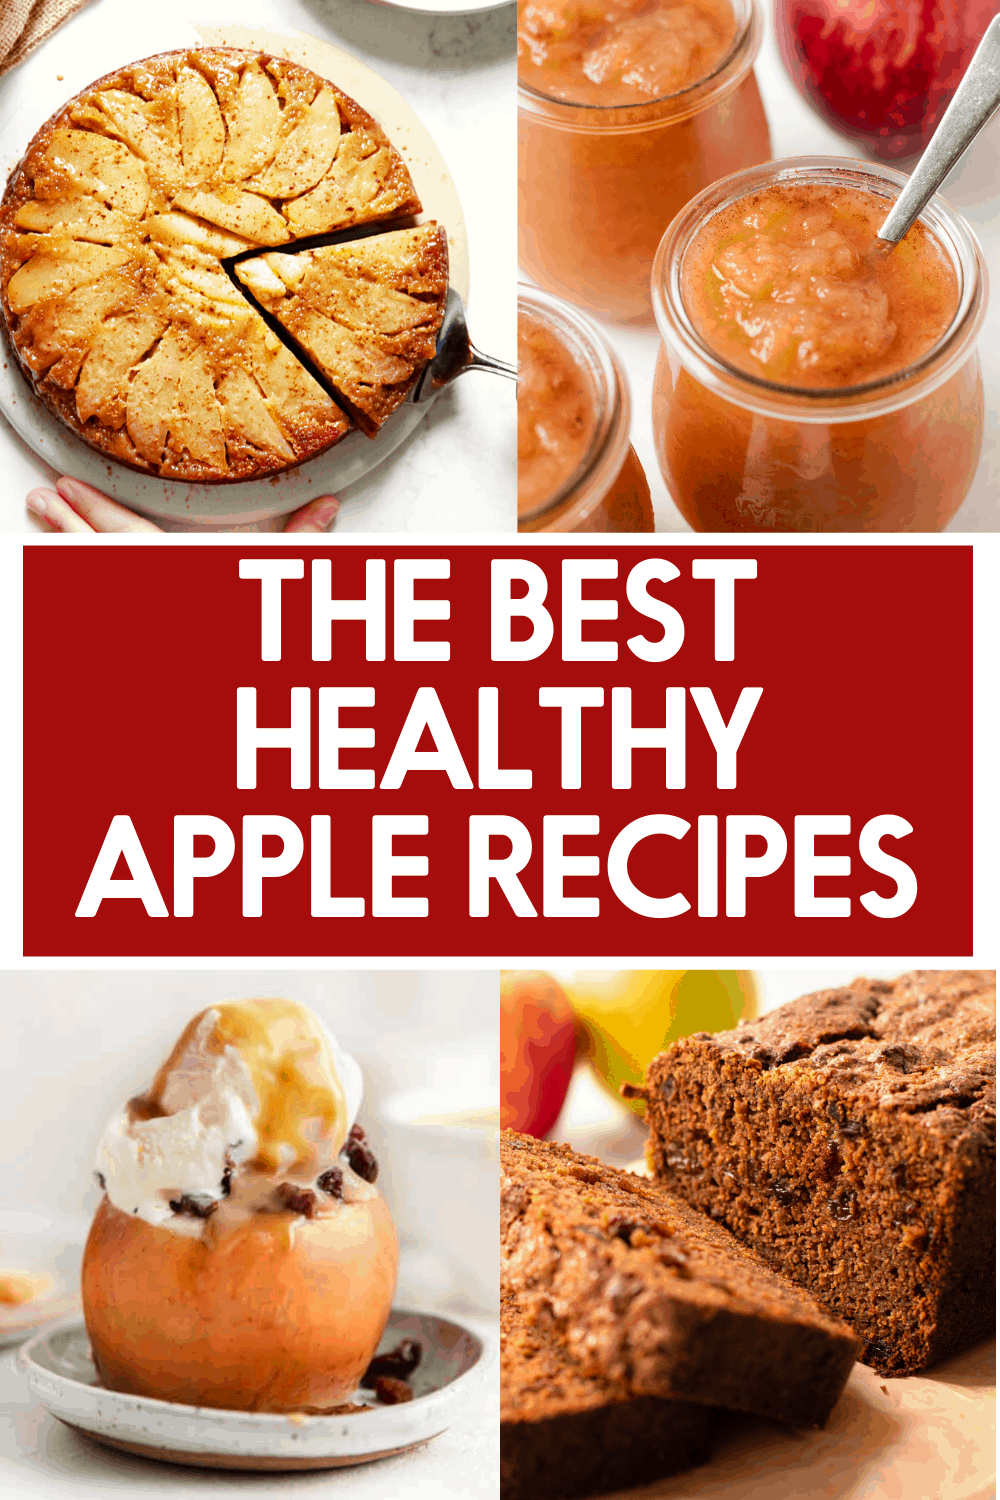 Our Favorite Gluten Free Apple Recipes